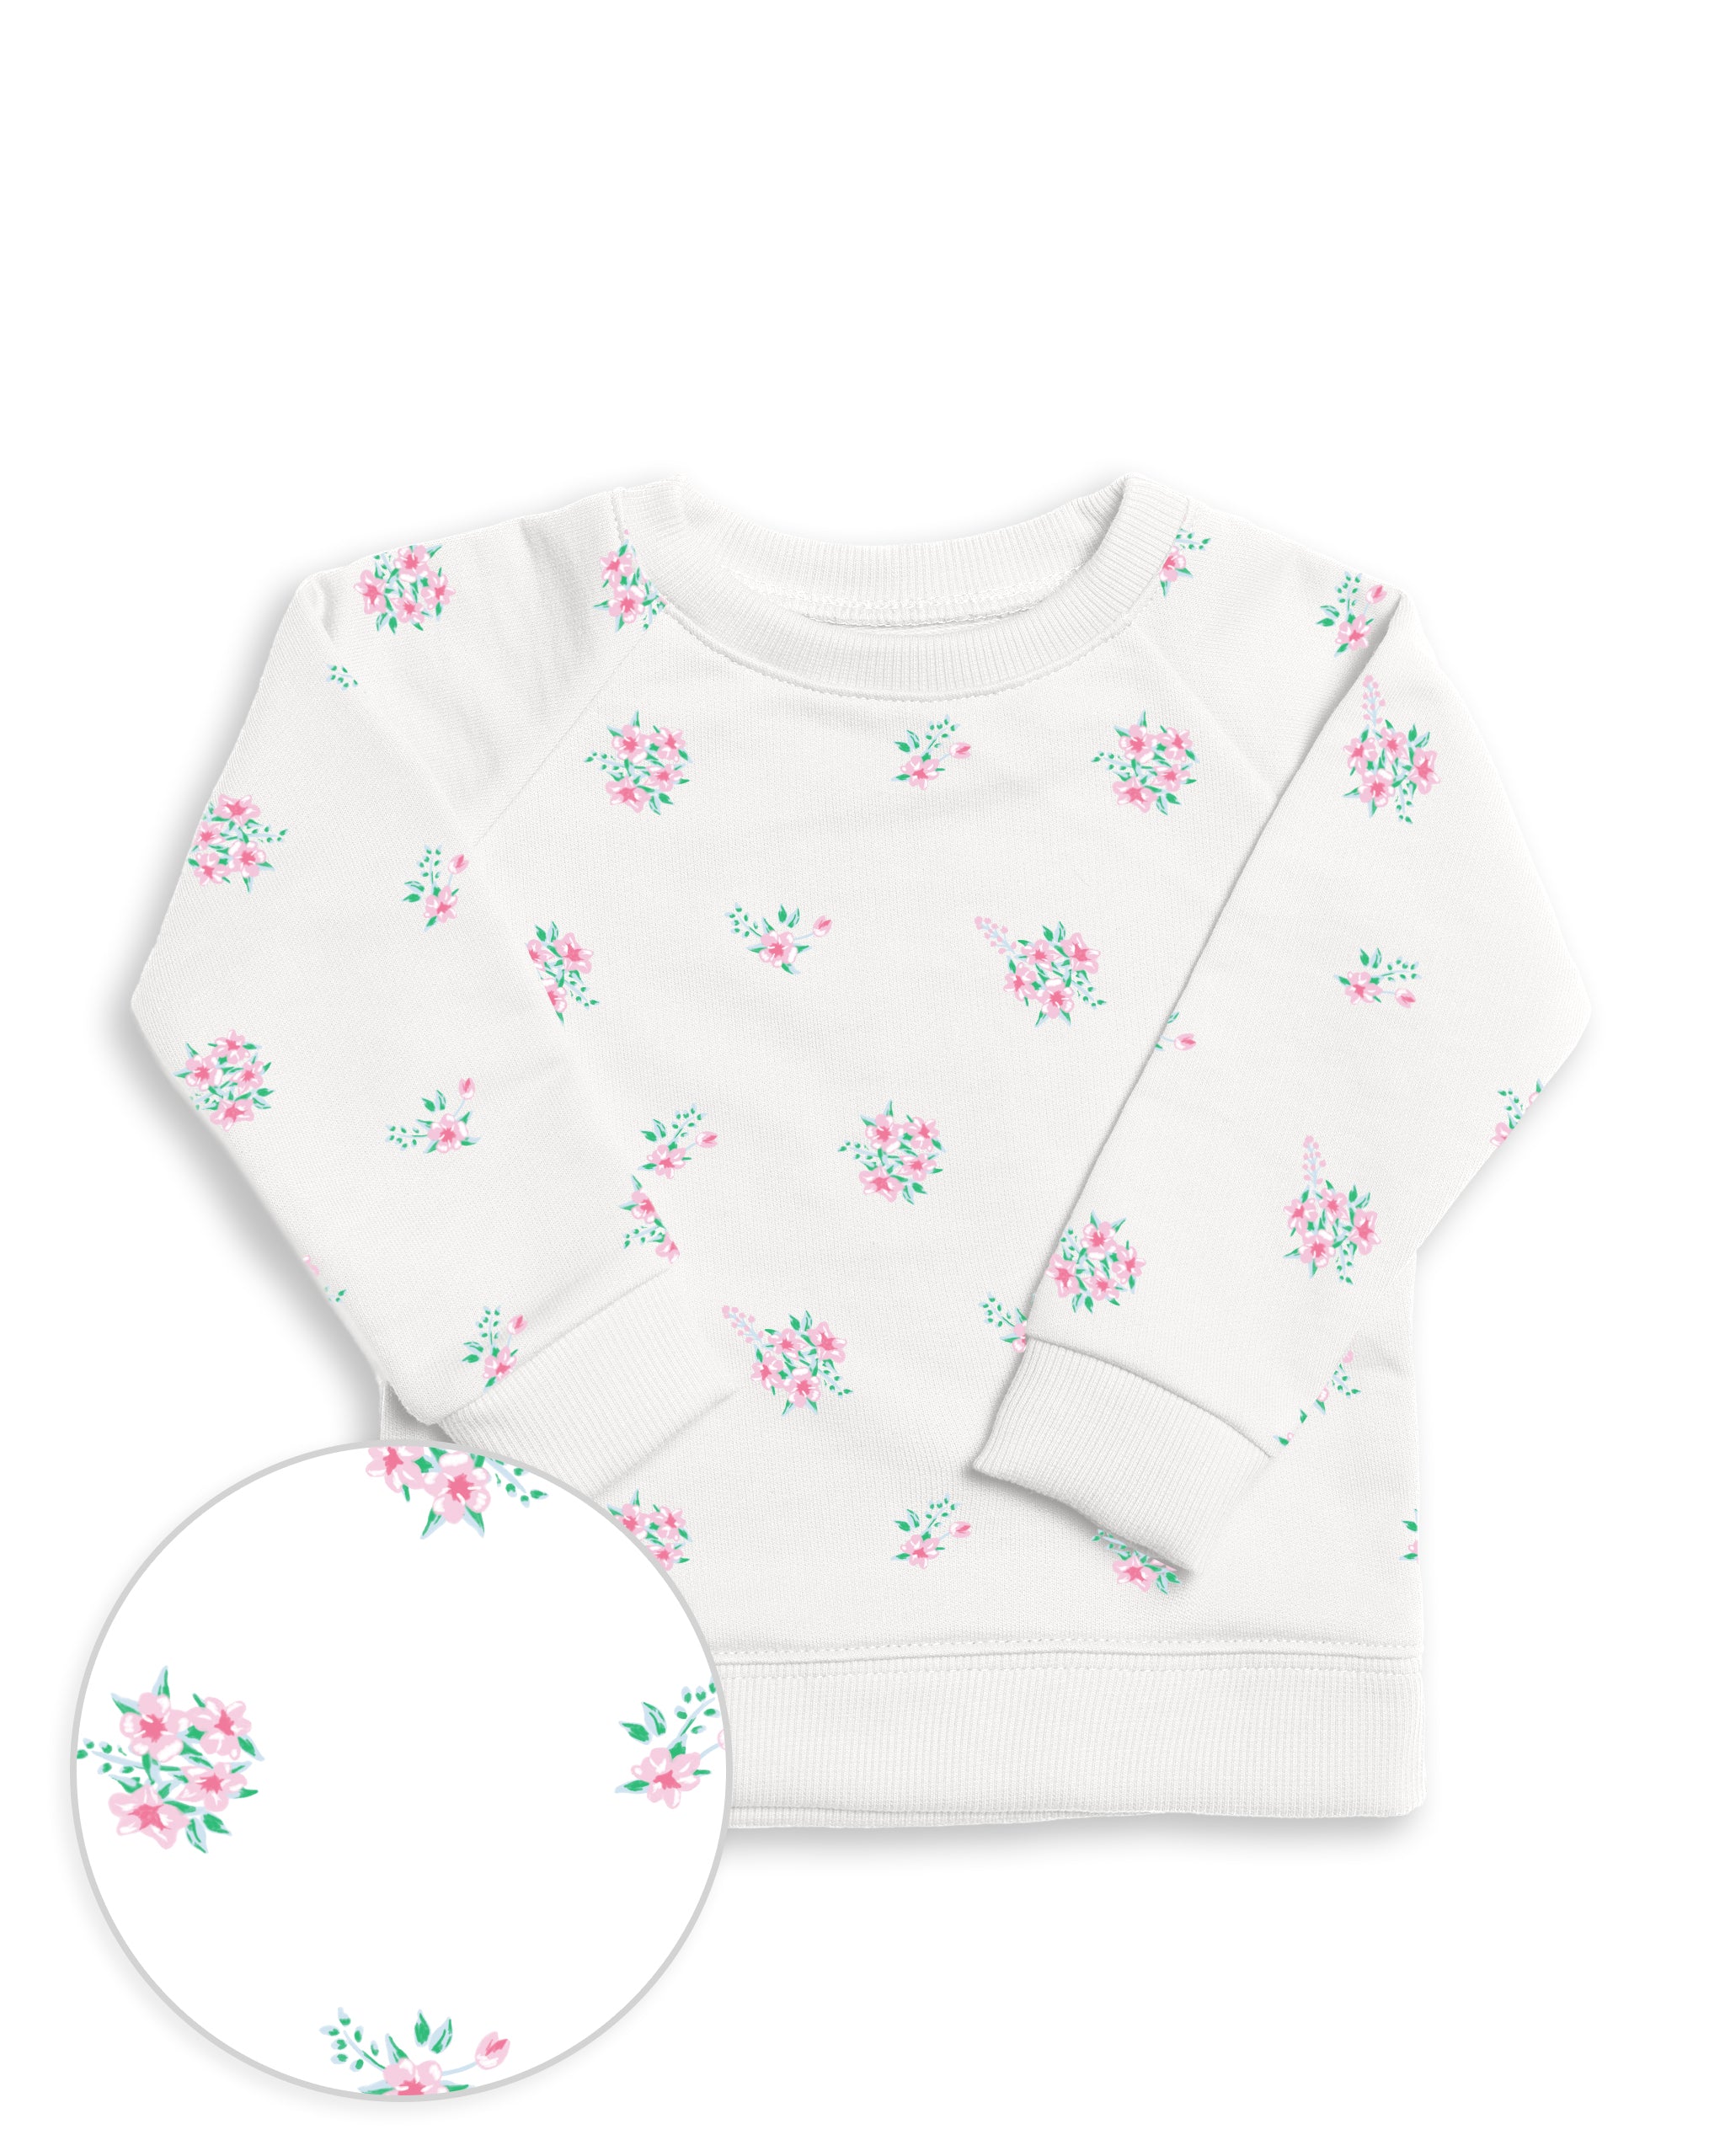 The Organic Printed Pullover Sweatshirt [Ditsy Floral]